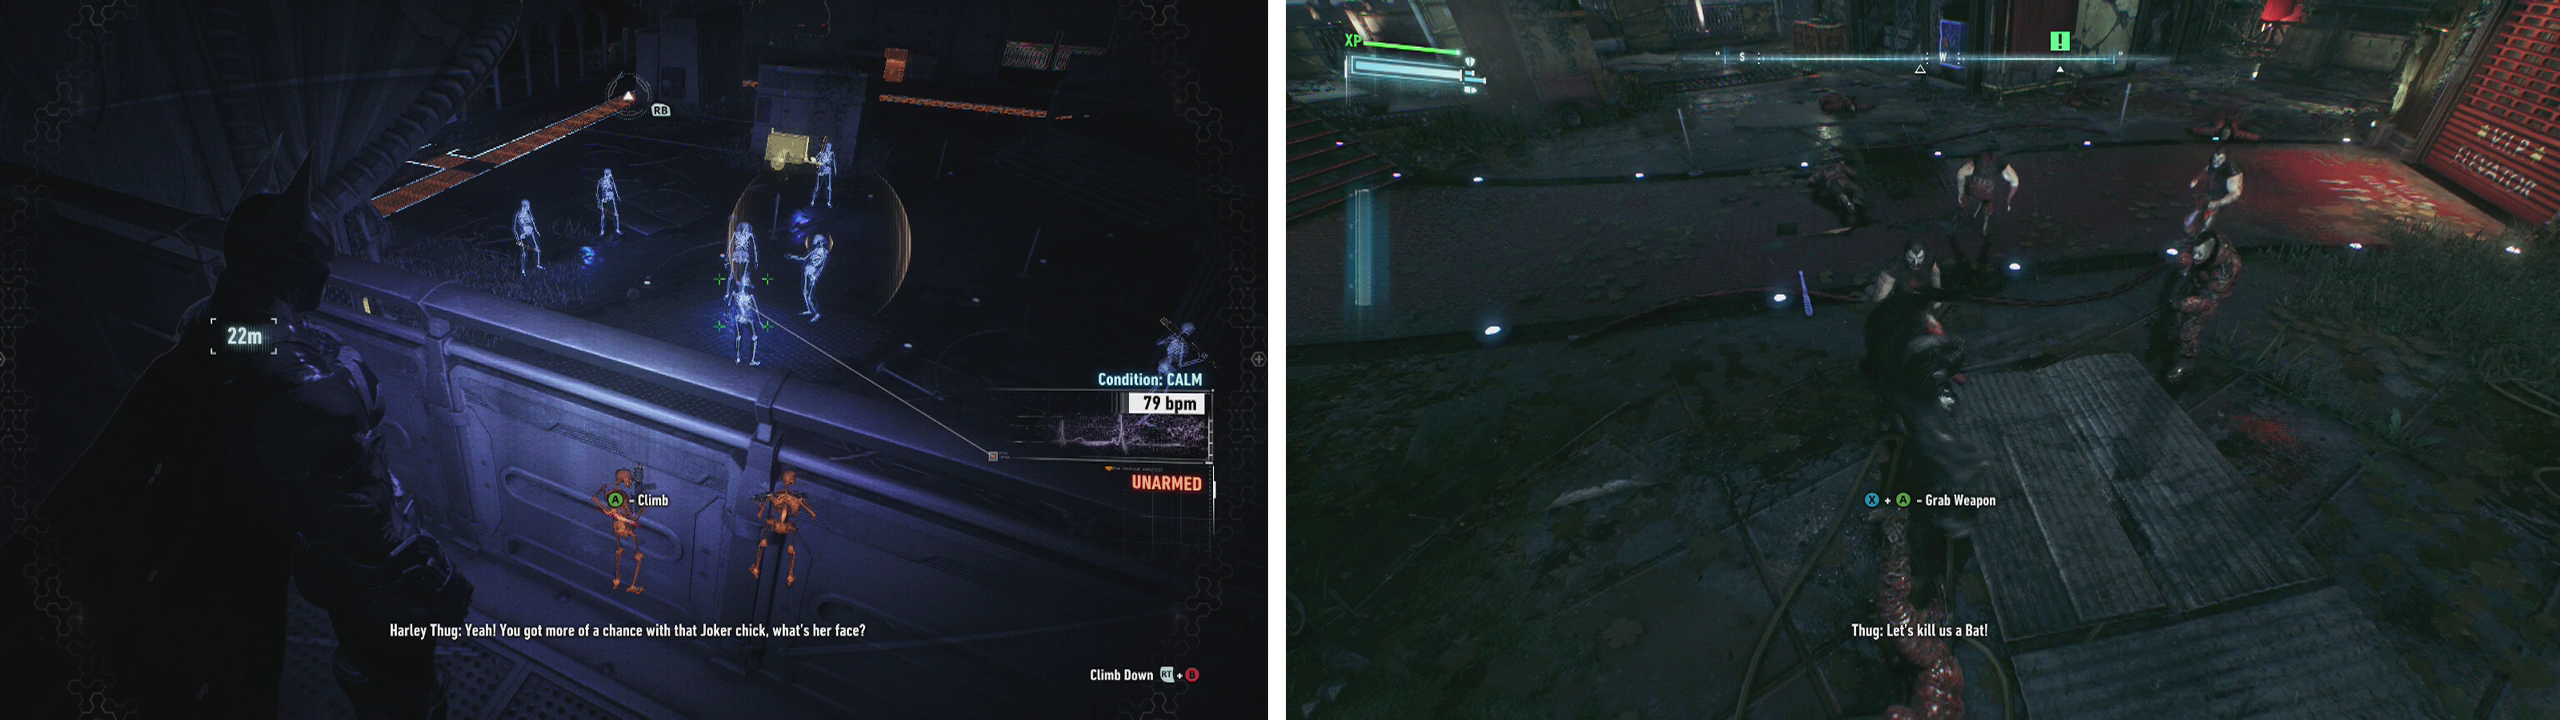 Use the Dirsuptor to disable the guns (left) and then jump in to fight the enemies below (right).